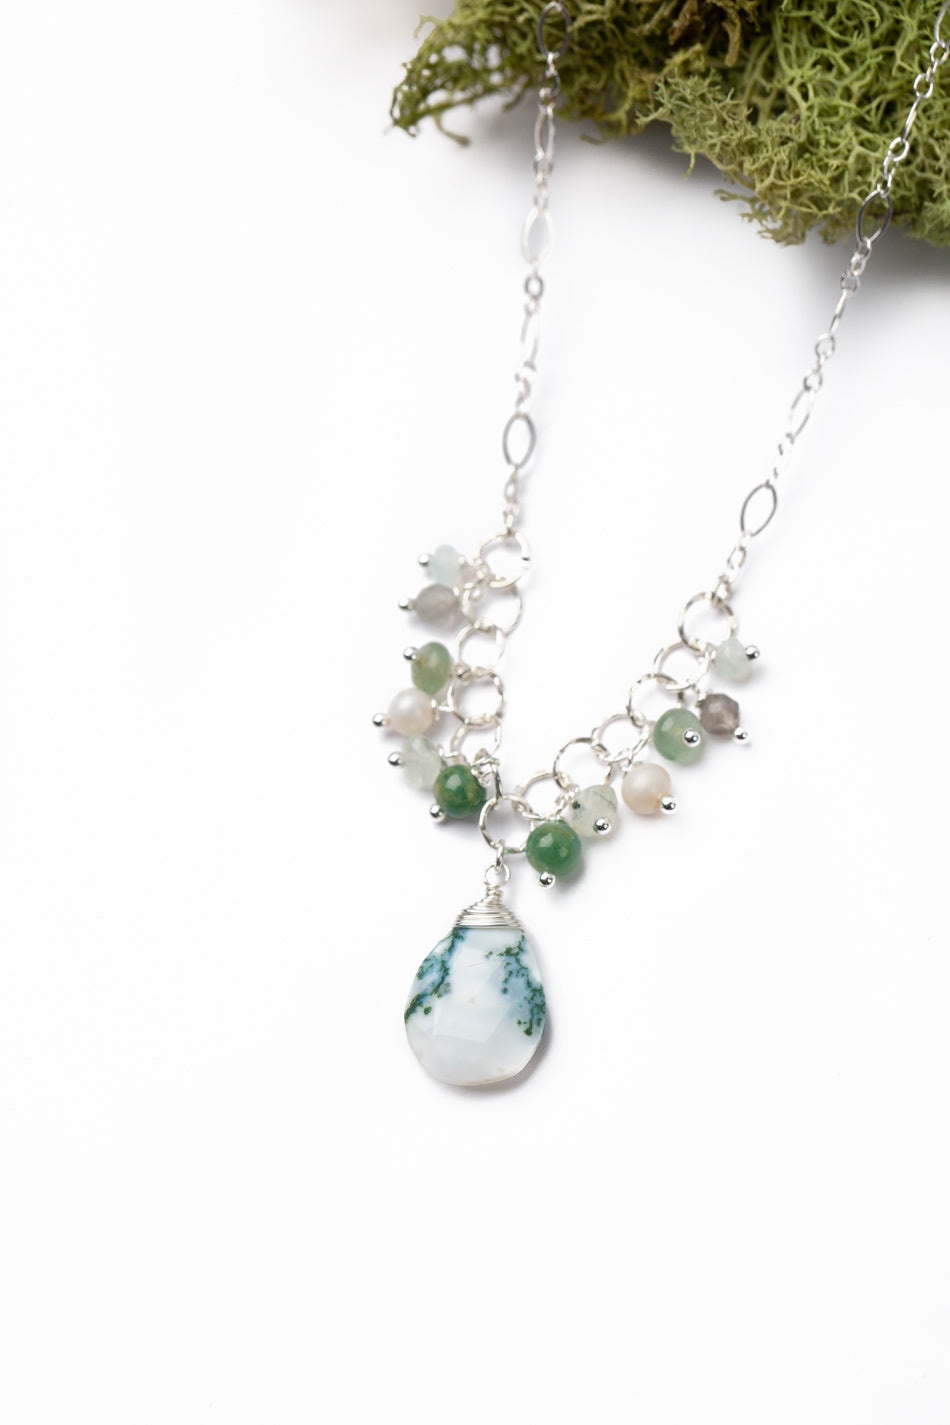 Spring Frost 19-21" Moonstone, Freshwater Pearl, Chrysoprase With Faceted Moss Agate Briolette Cluster Necklace